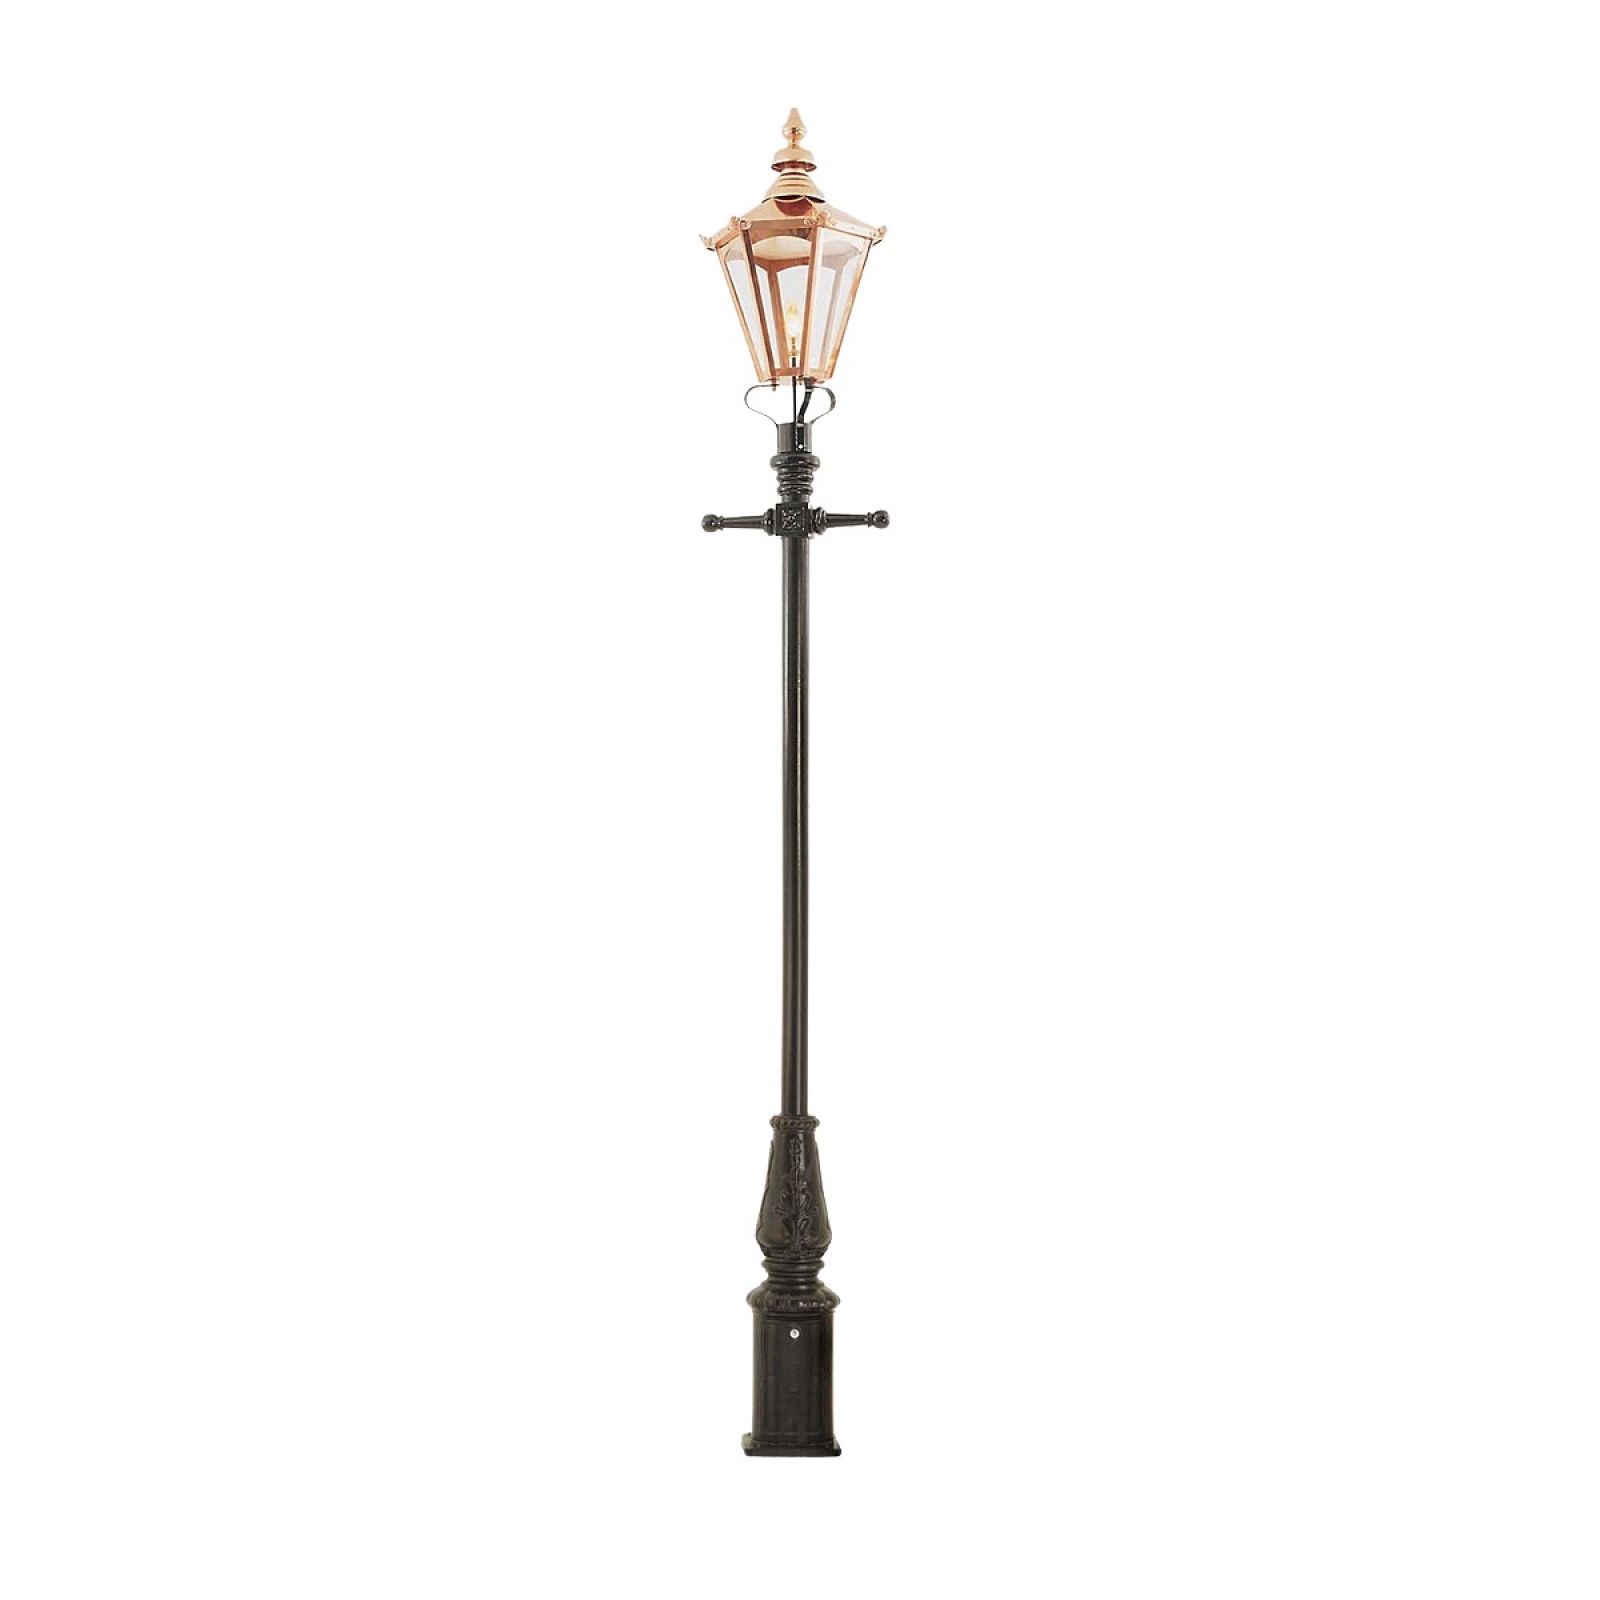 Lamp post 3555mm high and large copper hexagonal lantern